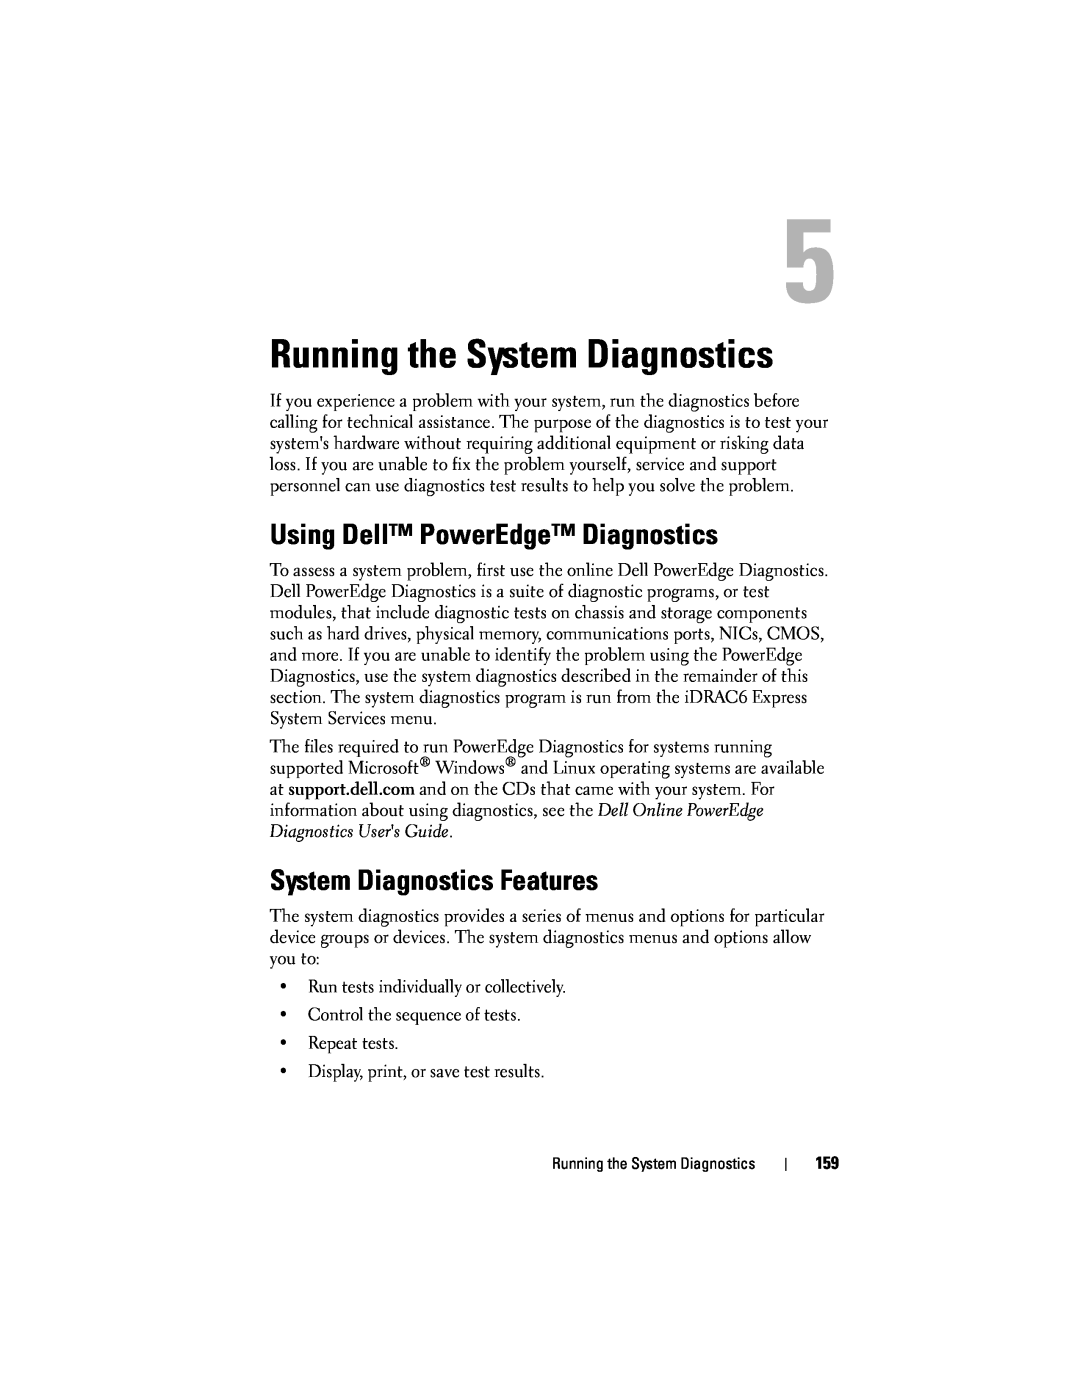 Dell R610 owner manual Running the System Diagnostics, Using Dell PowerEdge Diagnostics, System Diagnostics Features 